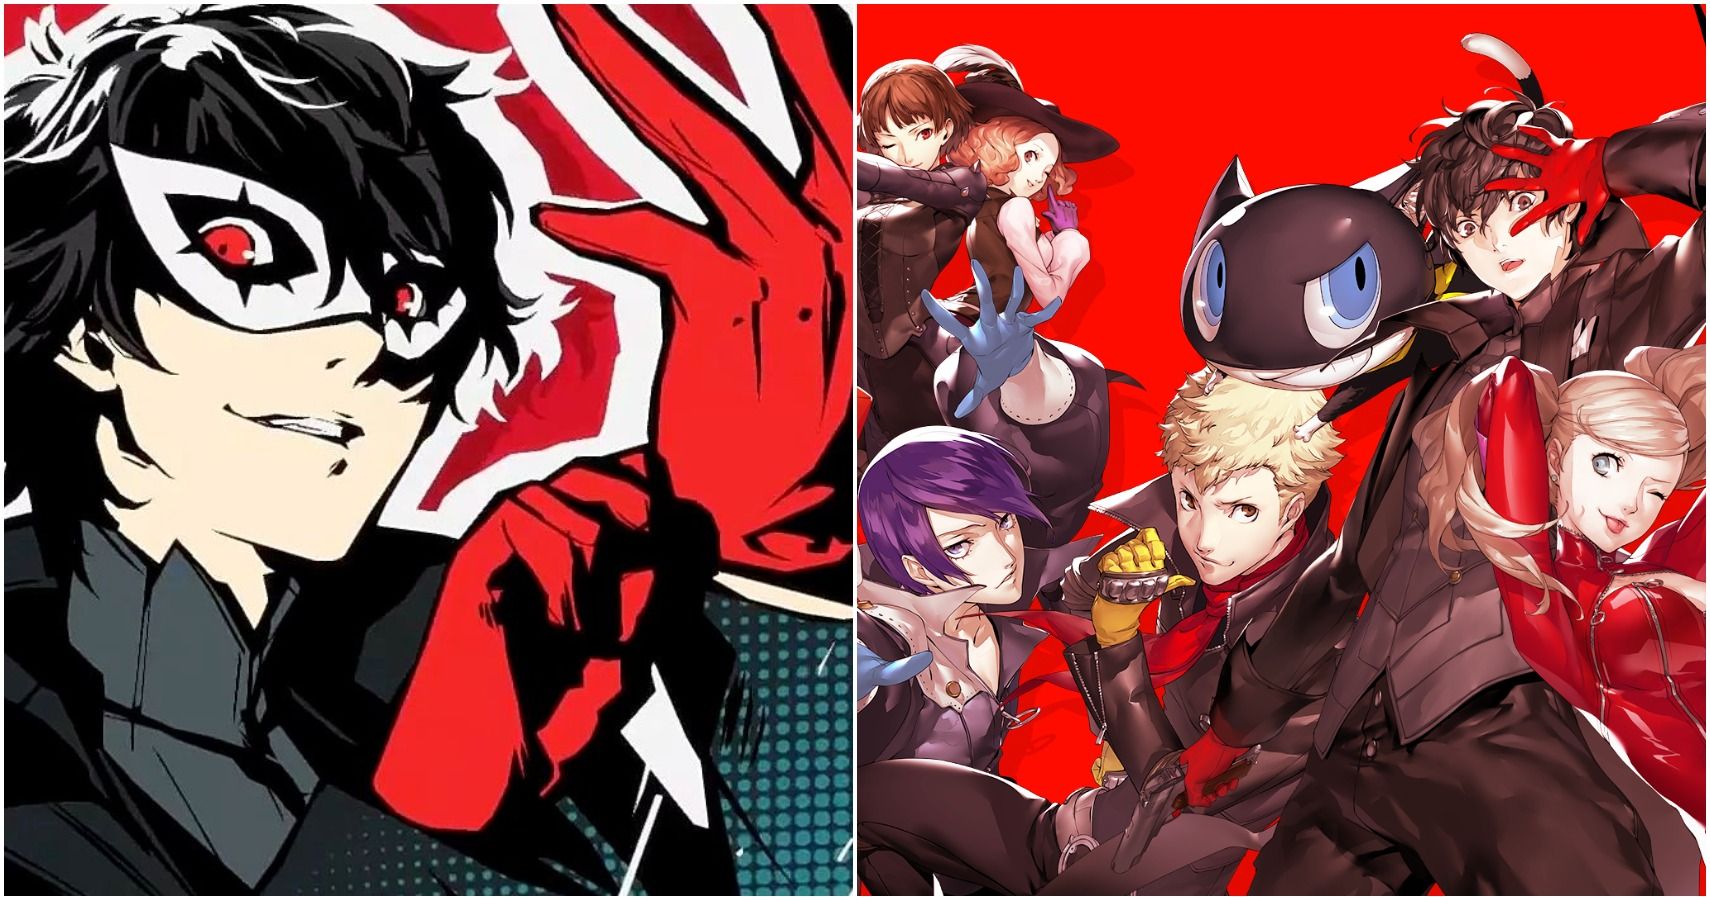 Persona 5: The 10 Best Abilities, Ranked